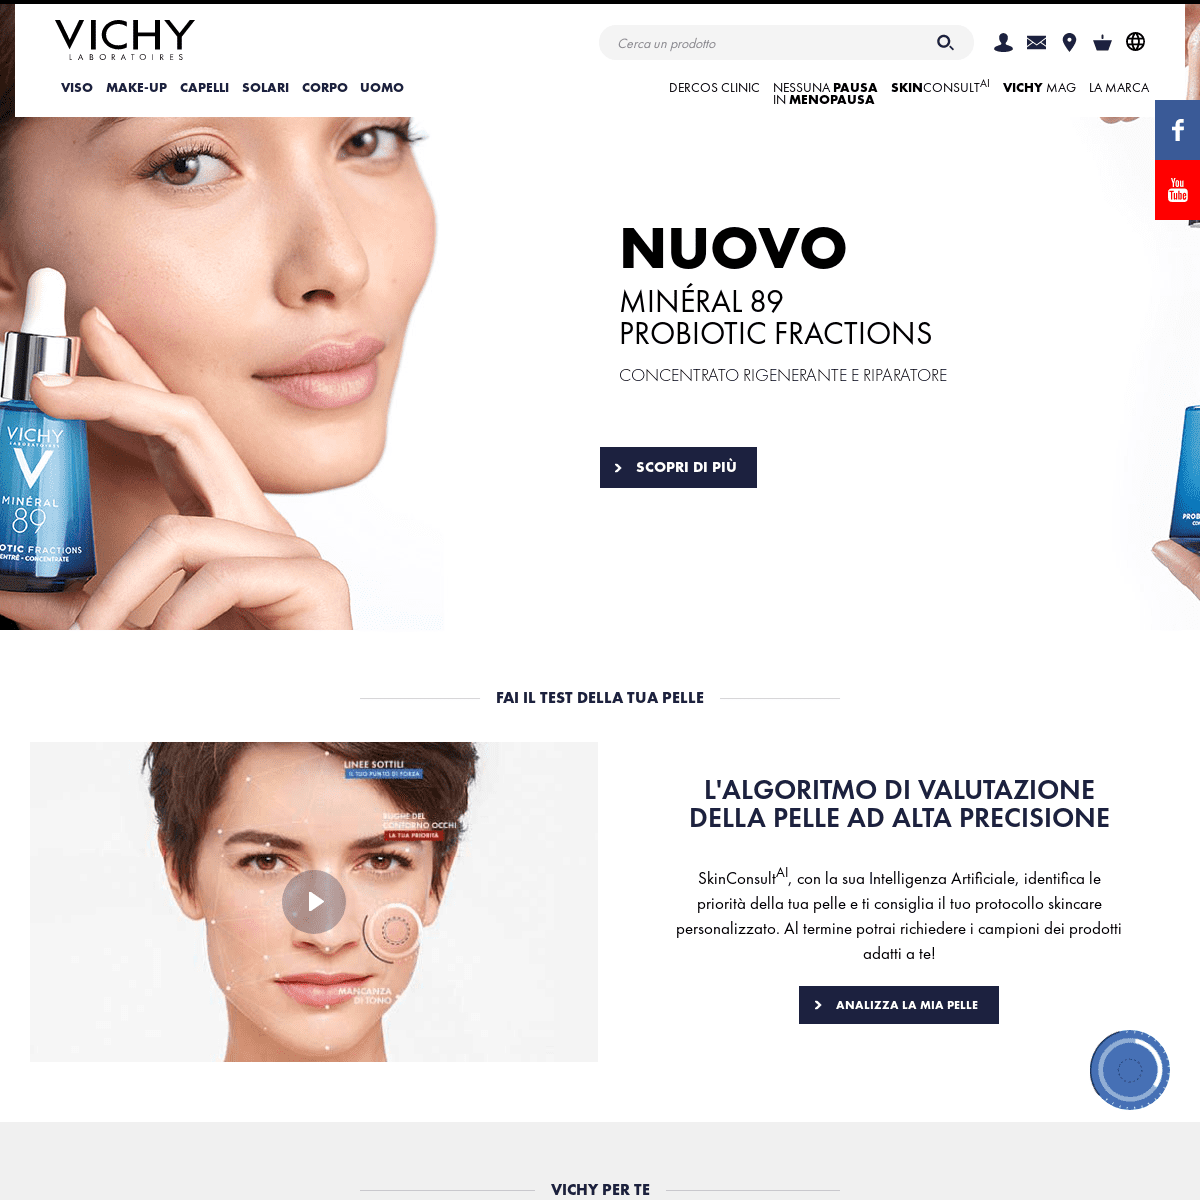 A complete backup of https://vichy.it